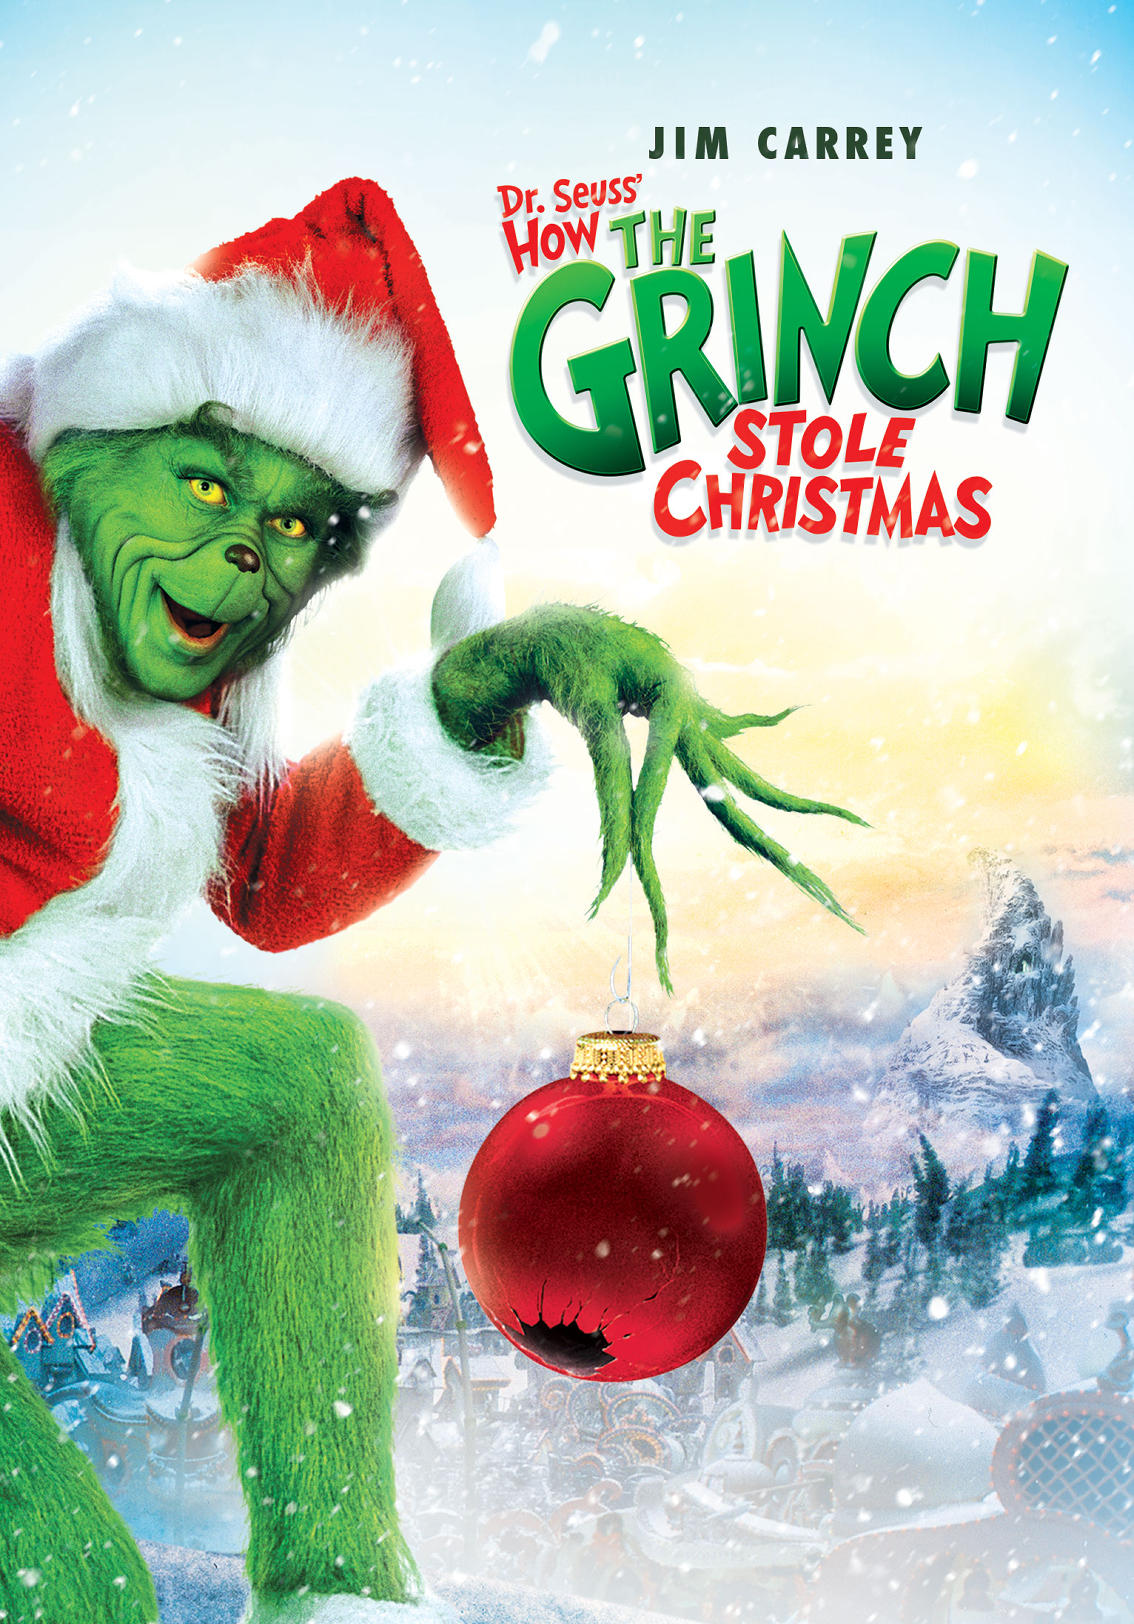 dr seuss how the grinch stole christmas book